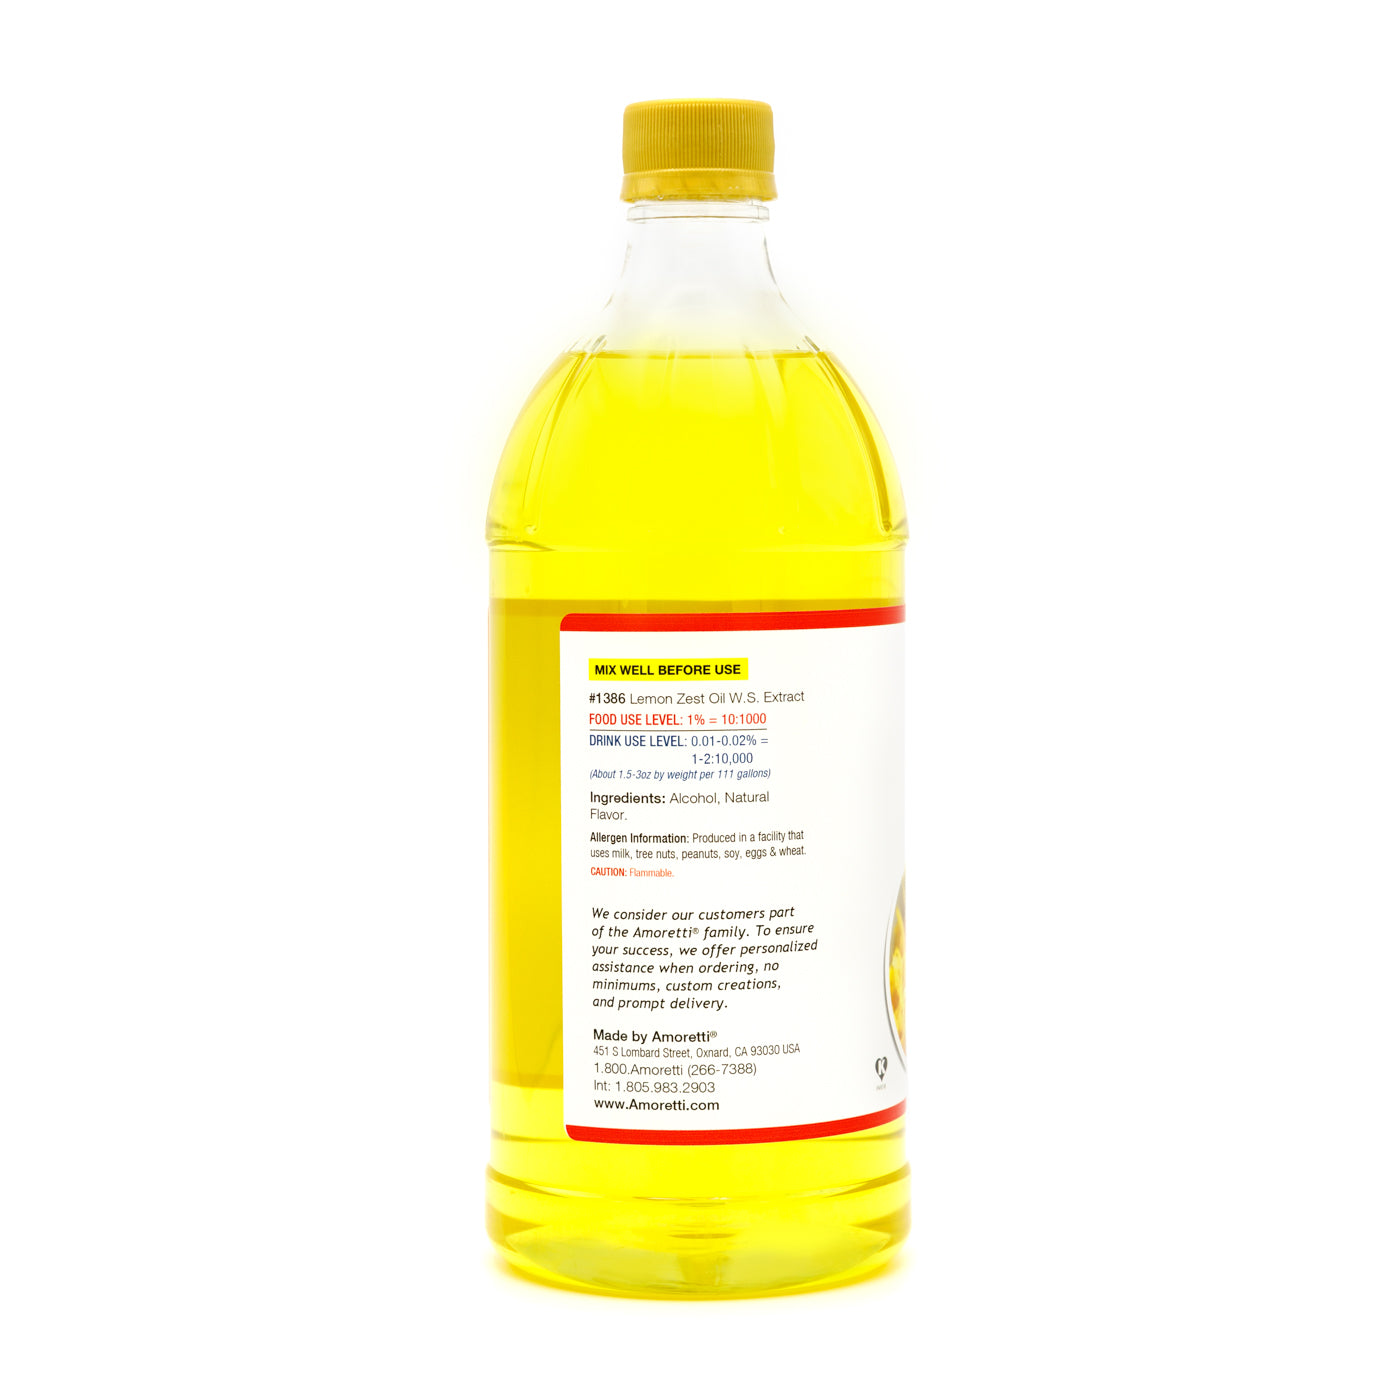 Amoretti - Meyer Lemon Extract Oil Soluble 4 oz - Highly Concentrated & Perfect for Pastry or Savory Applications, Preservative Free, Vegan, Kosher